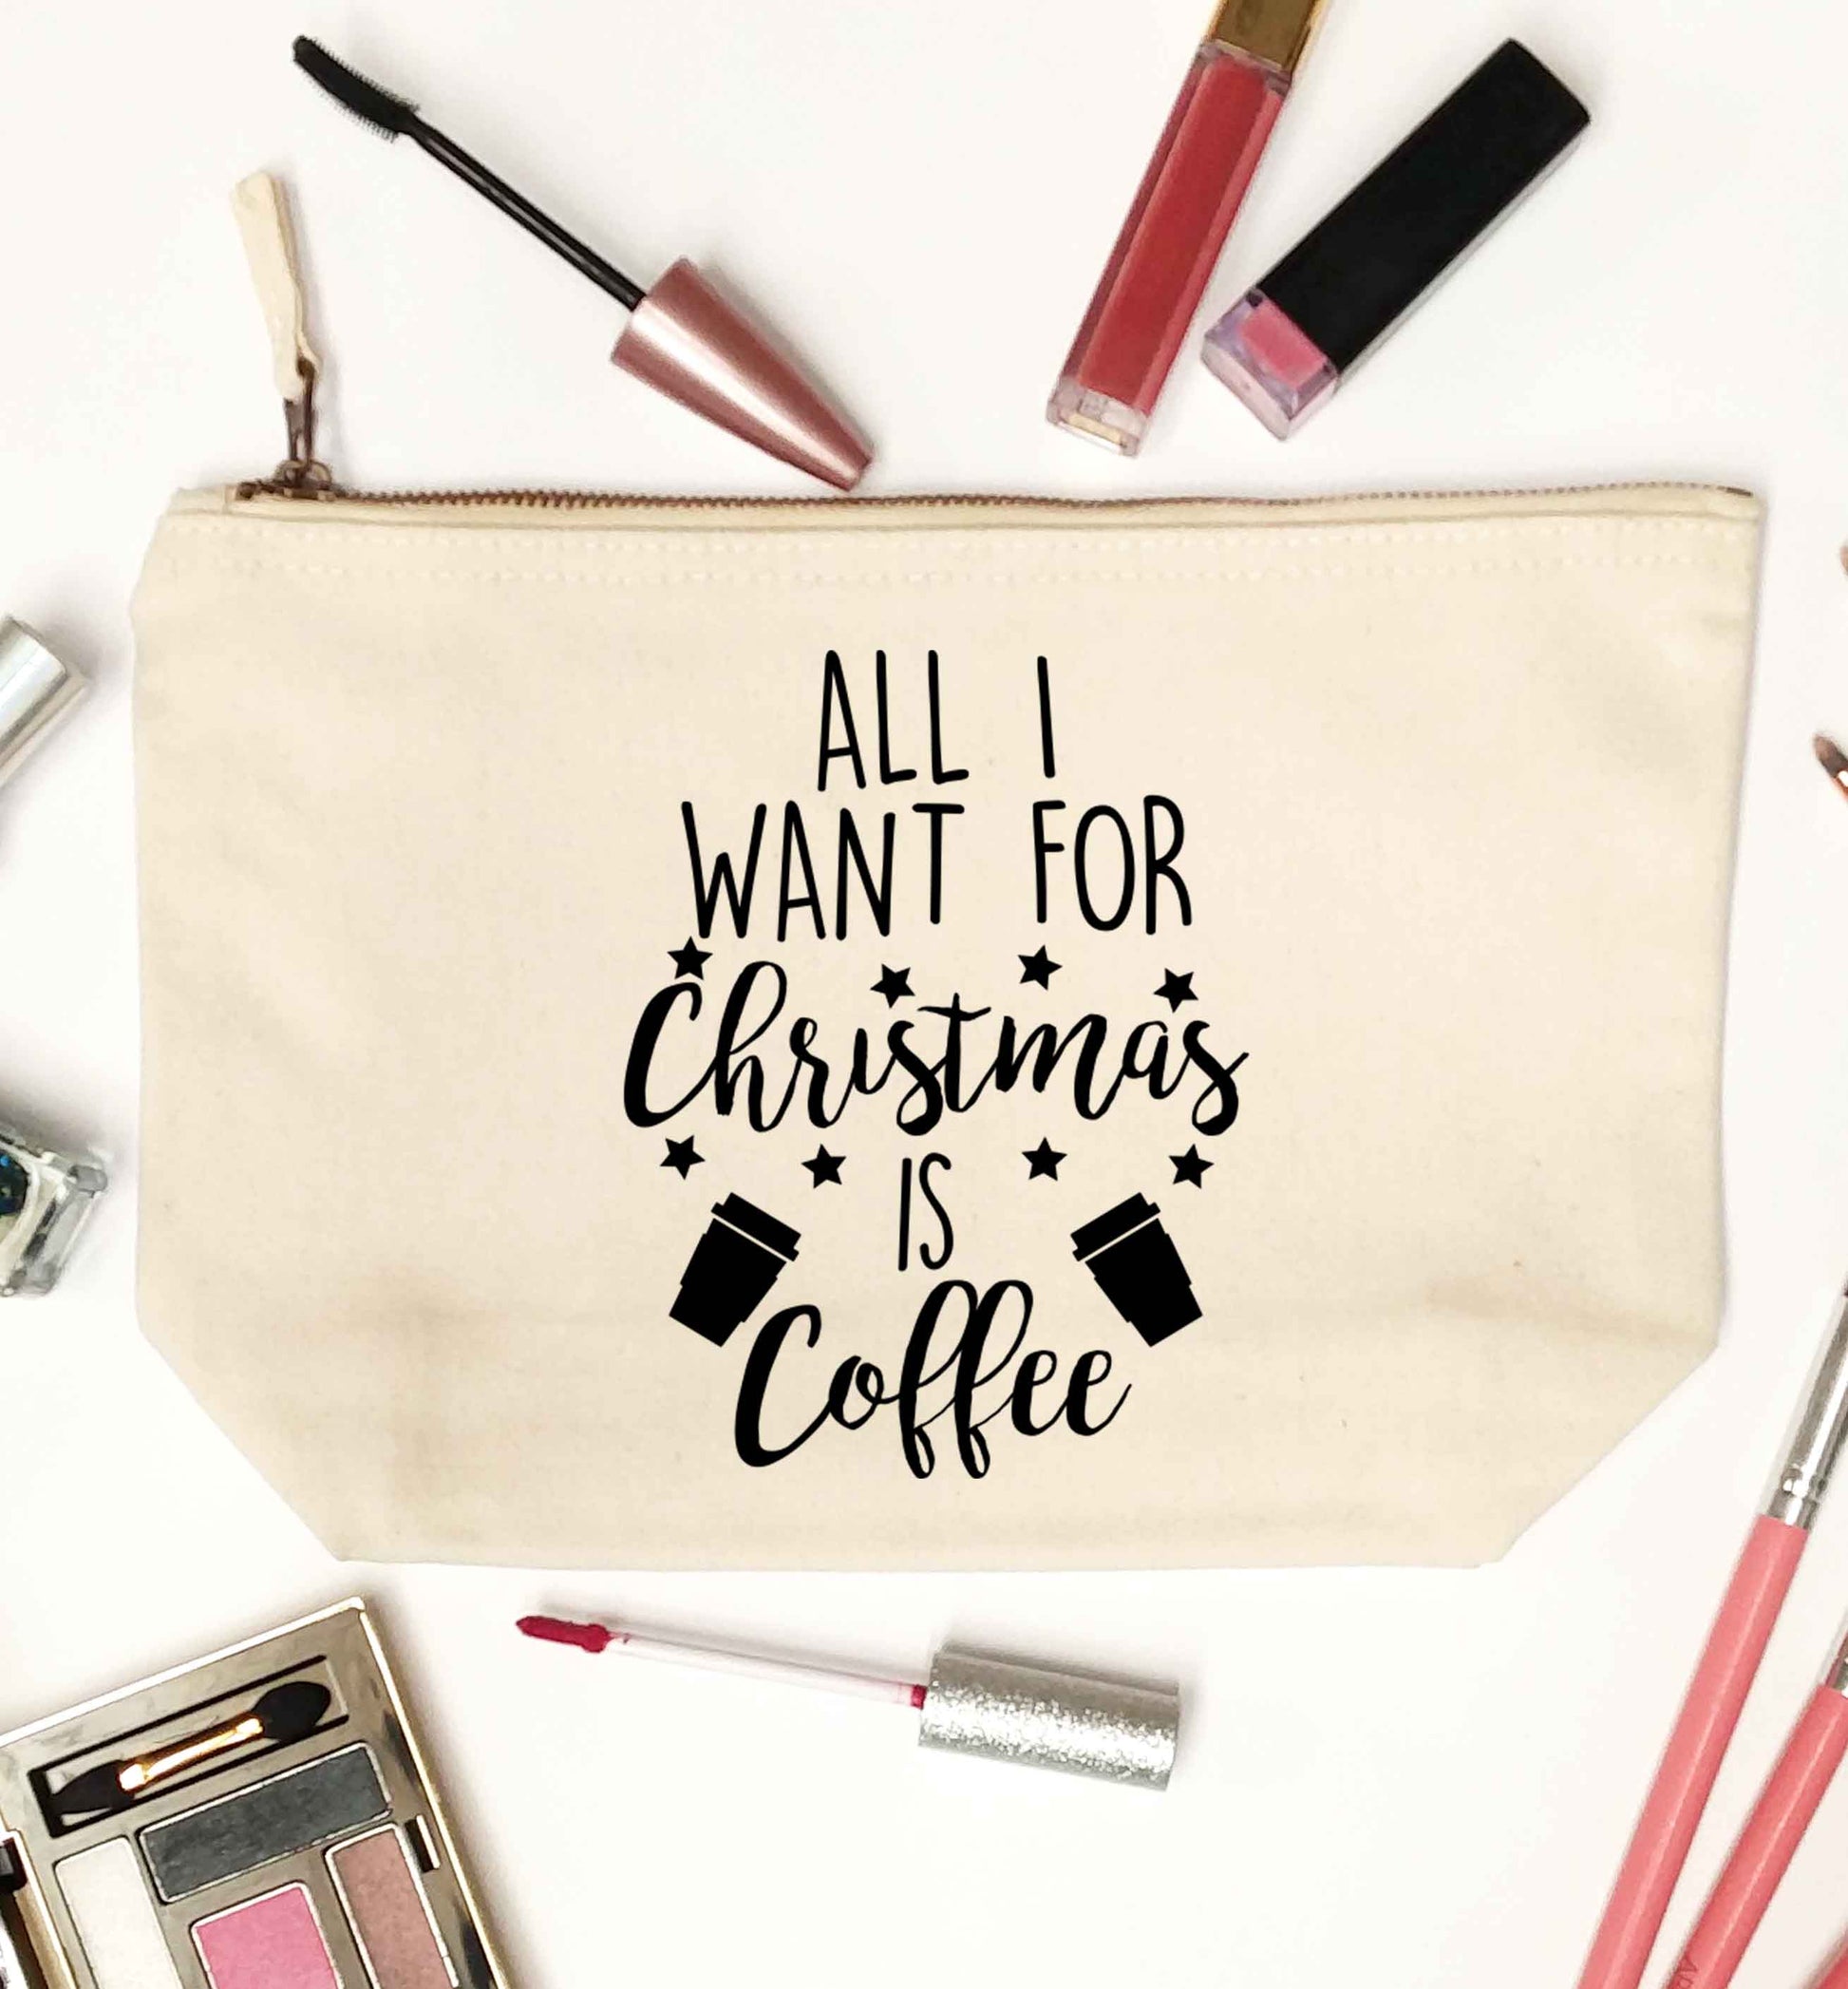 All I want for Christmas is coffee natural makeup bag